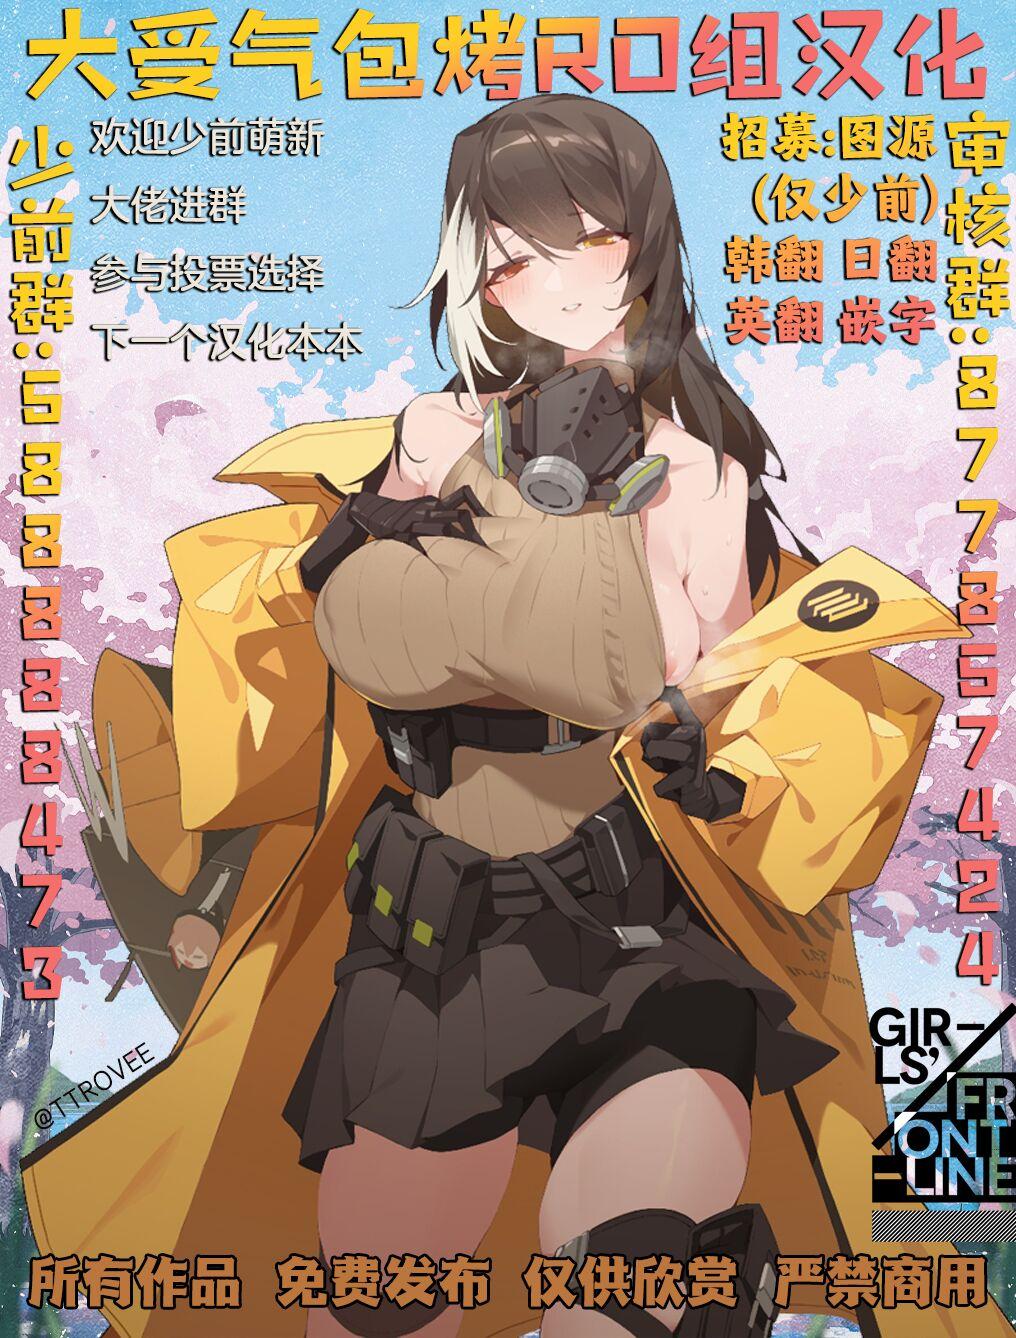 Tiny How To Use MDR - Girls frontline Tight Pussy Porn - Page 15